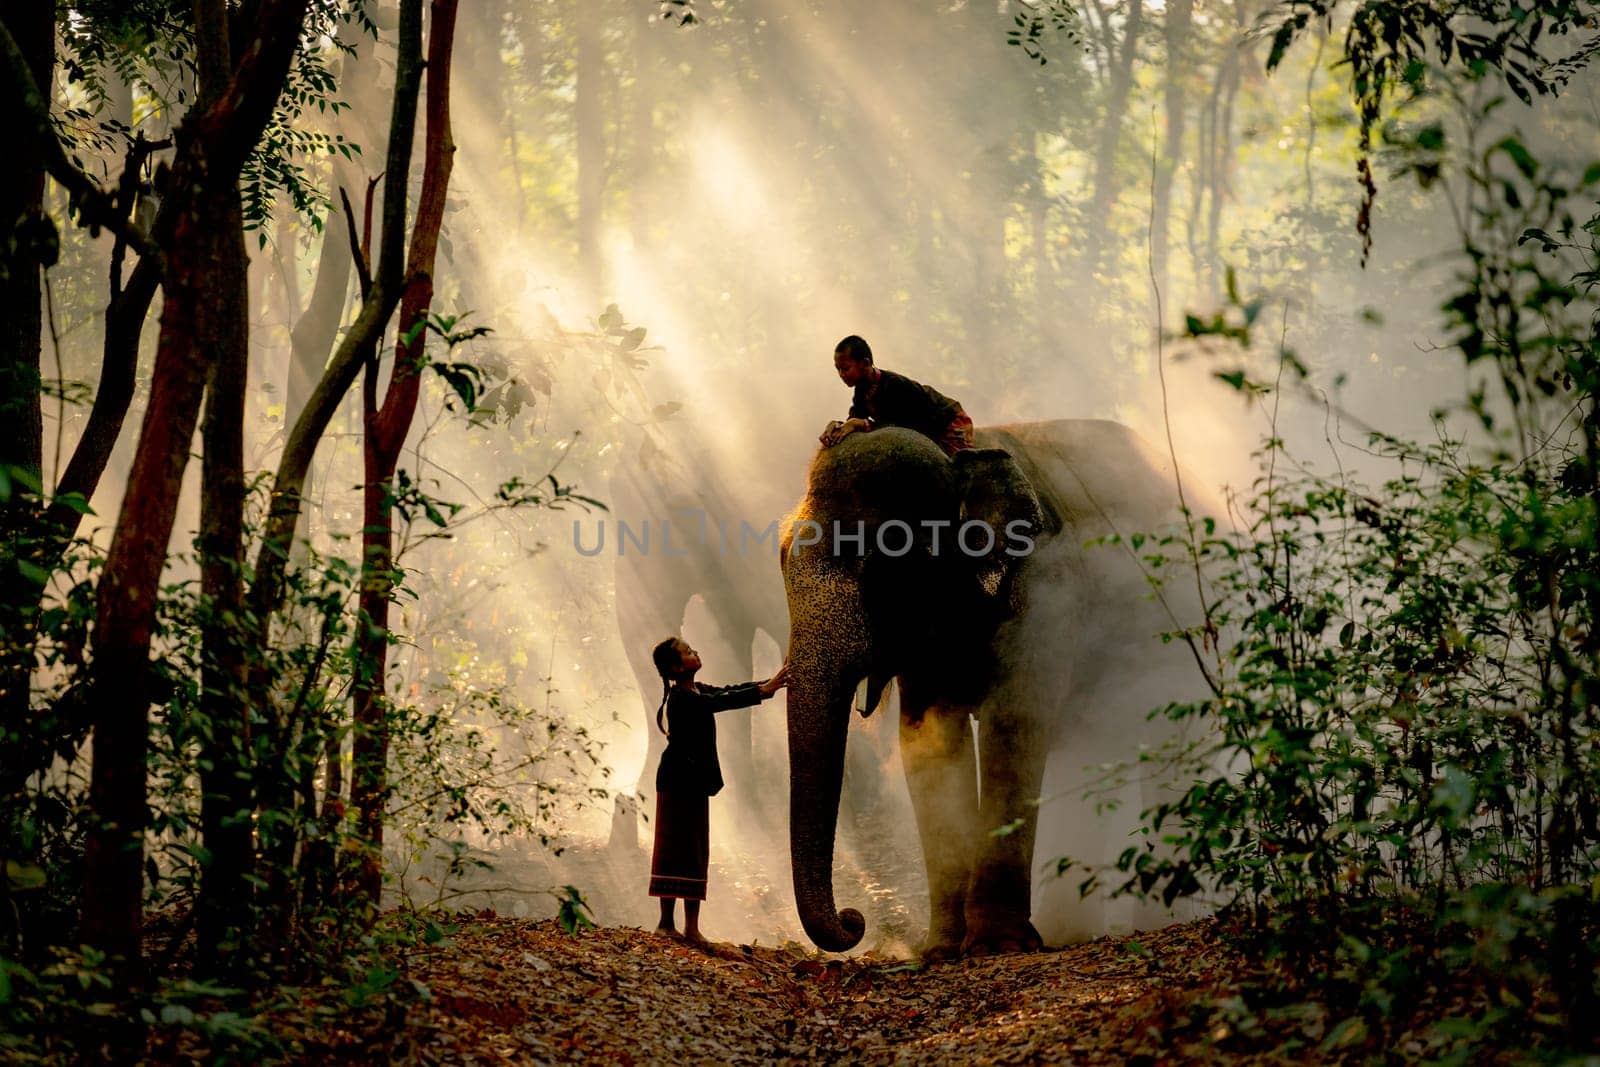 Silhouette of little girl touch elephant that has boy sit on its back in the forest with beautiful beam light in concept of relationship between animal and human in daily life. by nrradmin